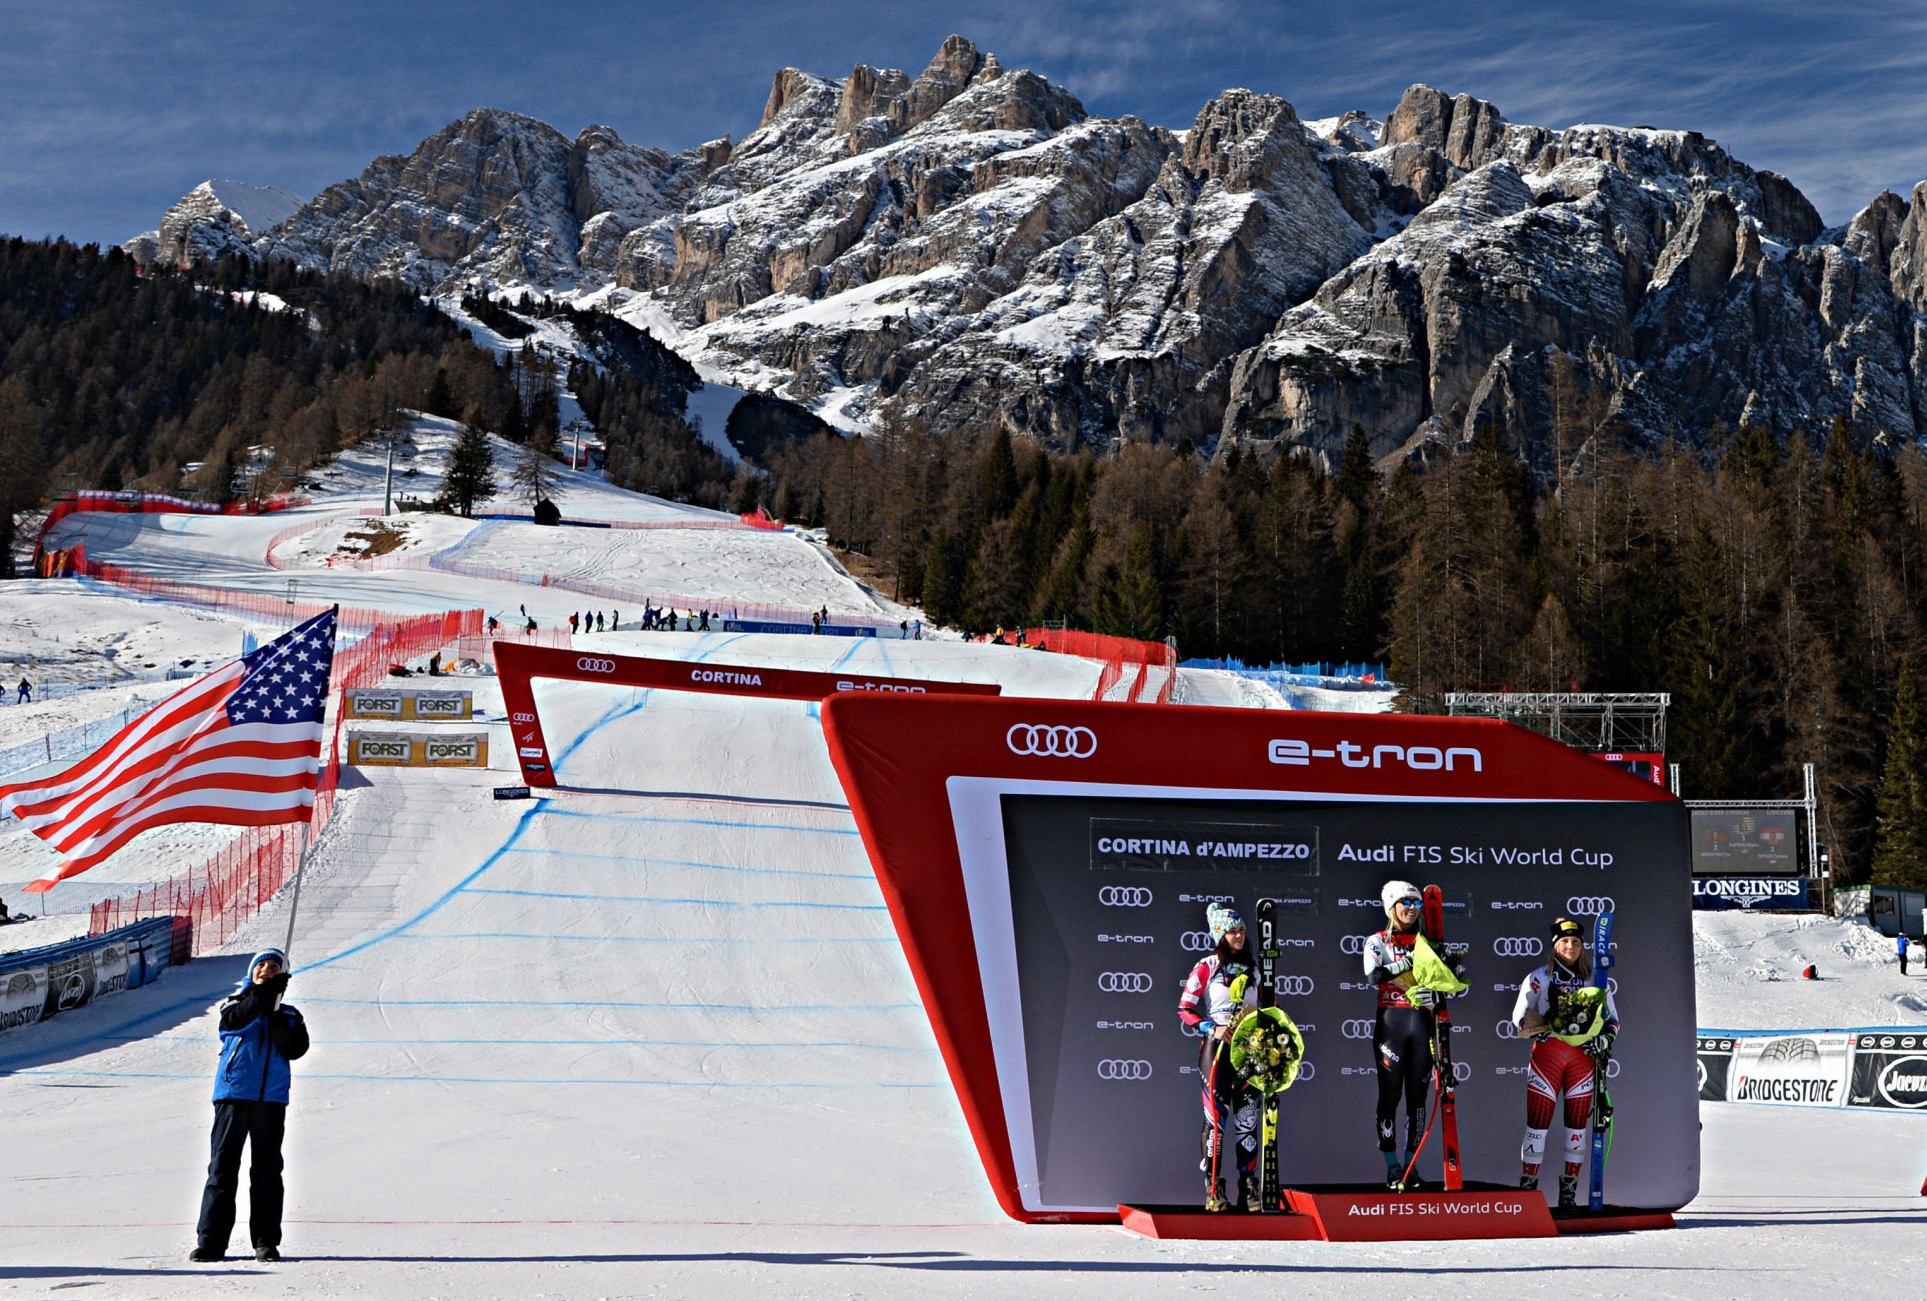 Cortina d'Ampezzo was scheduled to host the FIS Alpine Ski World Cup finals, which have now been cancelled because of the coronavirus outbreak ©Getty Images